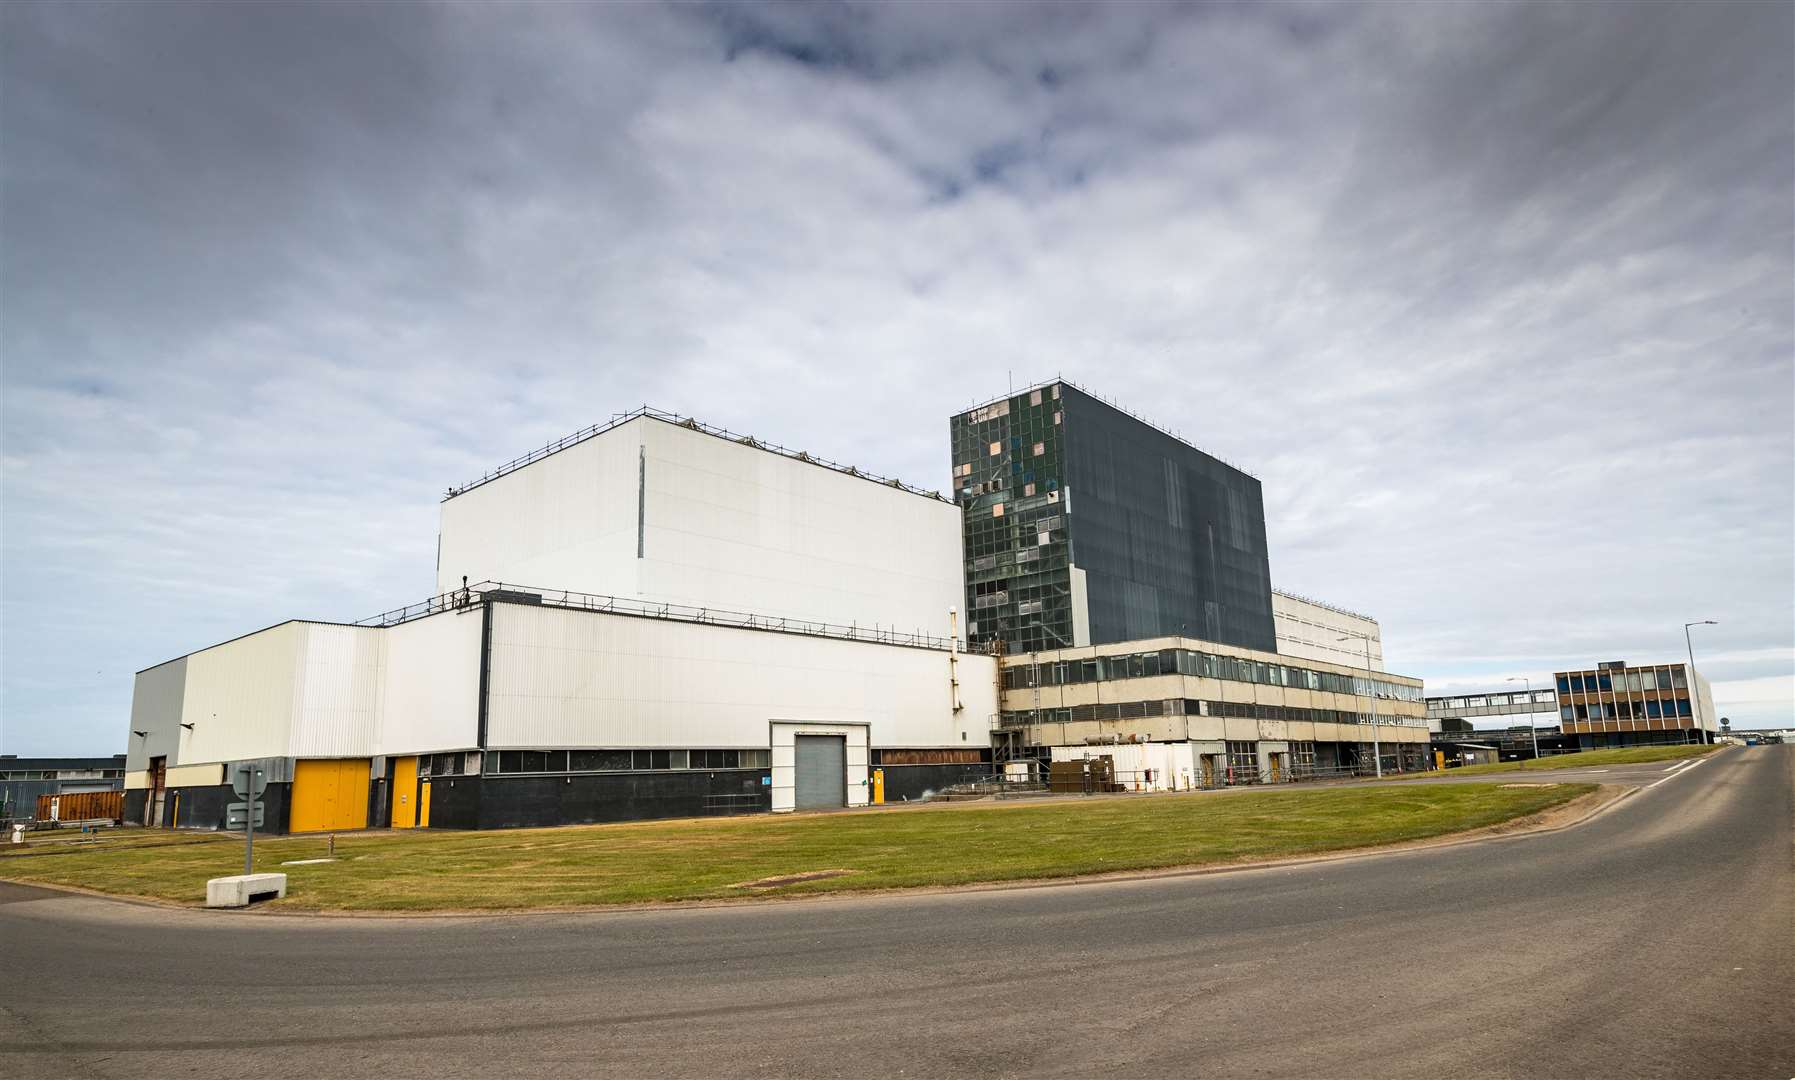 The prototype fast reactor stack at Dounreay will be demolished and replaced. Picture: DSRL/NDA